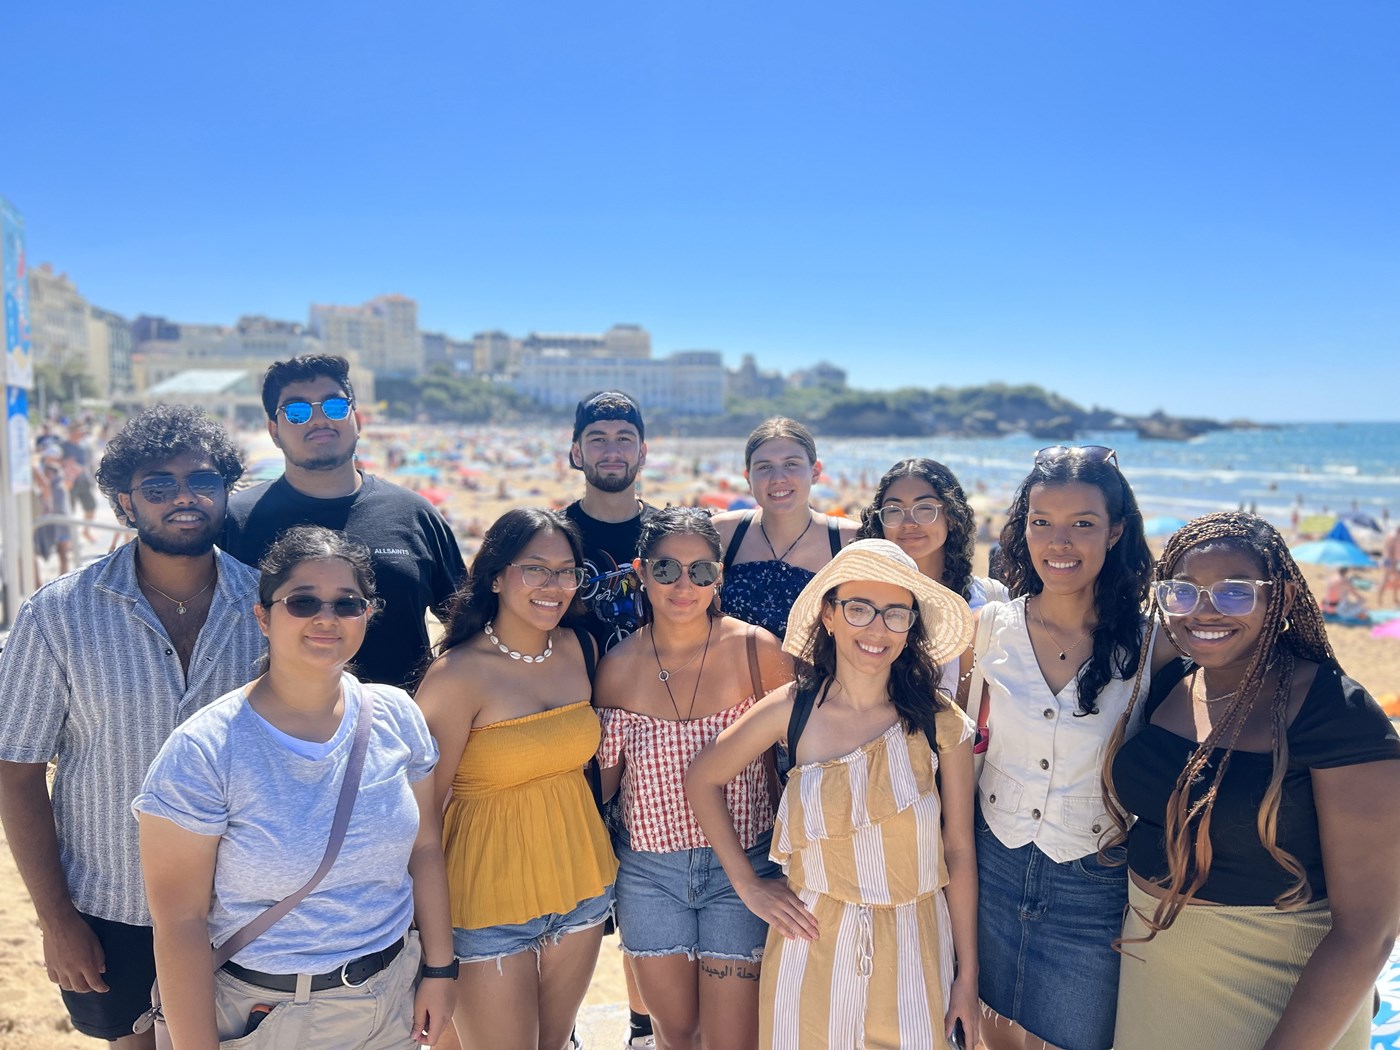 UMass Lowell Honors students studying abroad in Biarritz, France